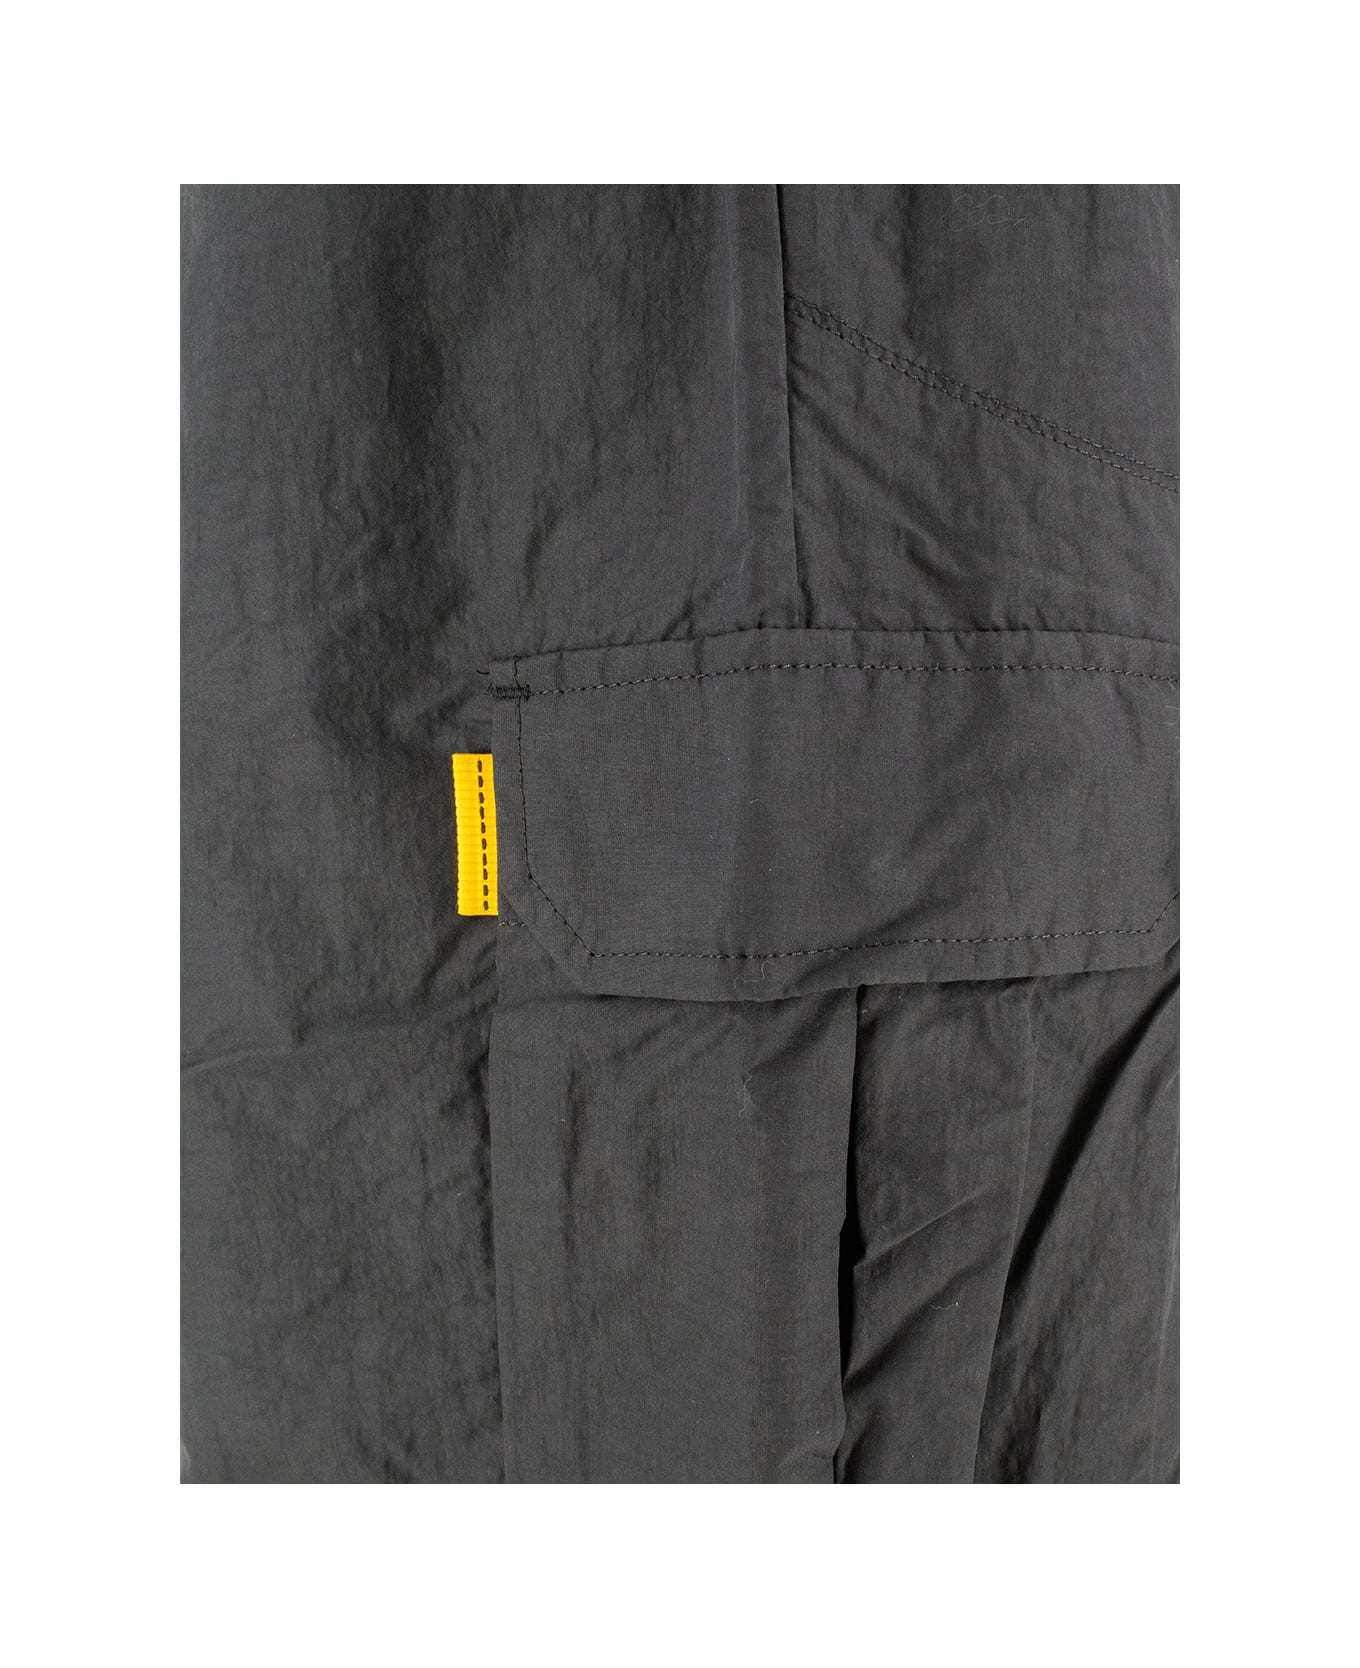 Parajumpers Trousers - BLACK ボトムス